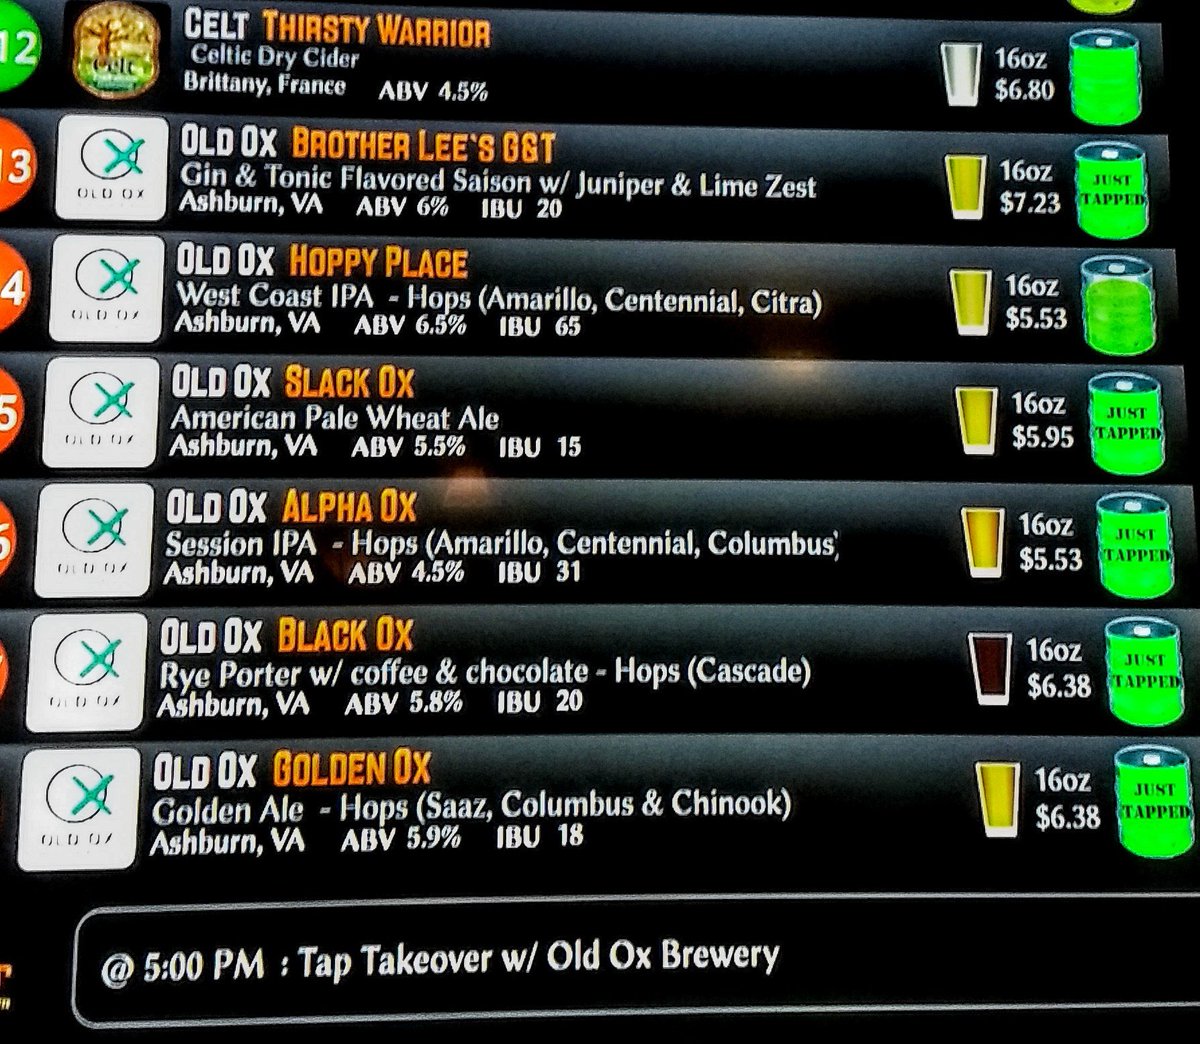 Our #TapTaker w/ @OldOxBrewery has begun and the brews are loaded. Stop by for a pint! Music by @elvis_nixon. #HalfPriceBurgers #HoppyHourTill630 @LoCoEntertain @vabrews @CheersVA